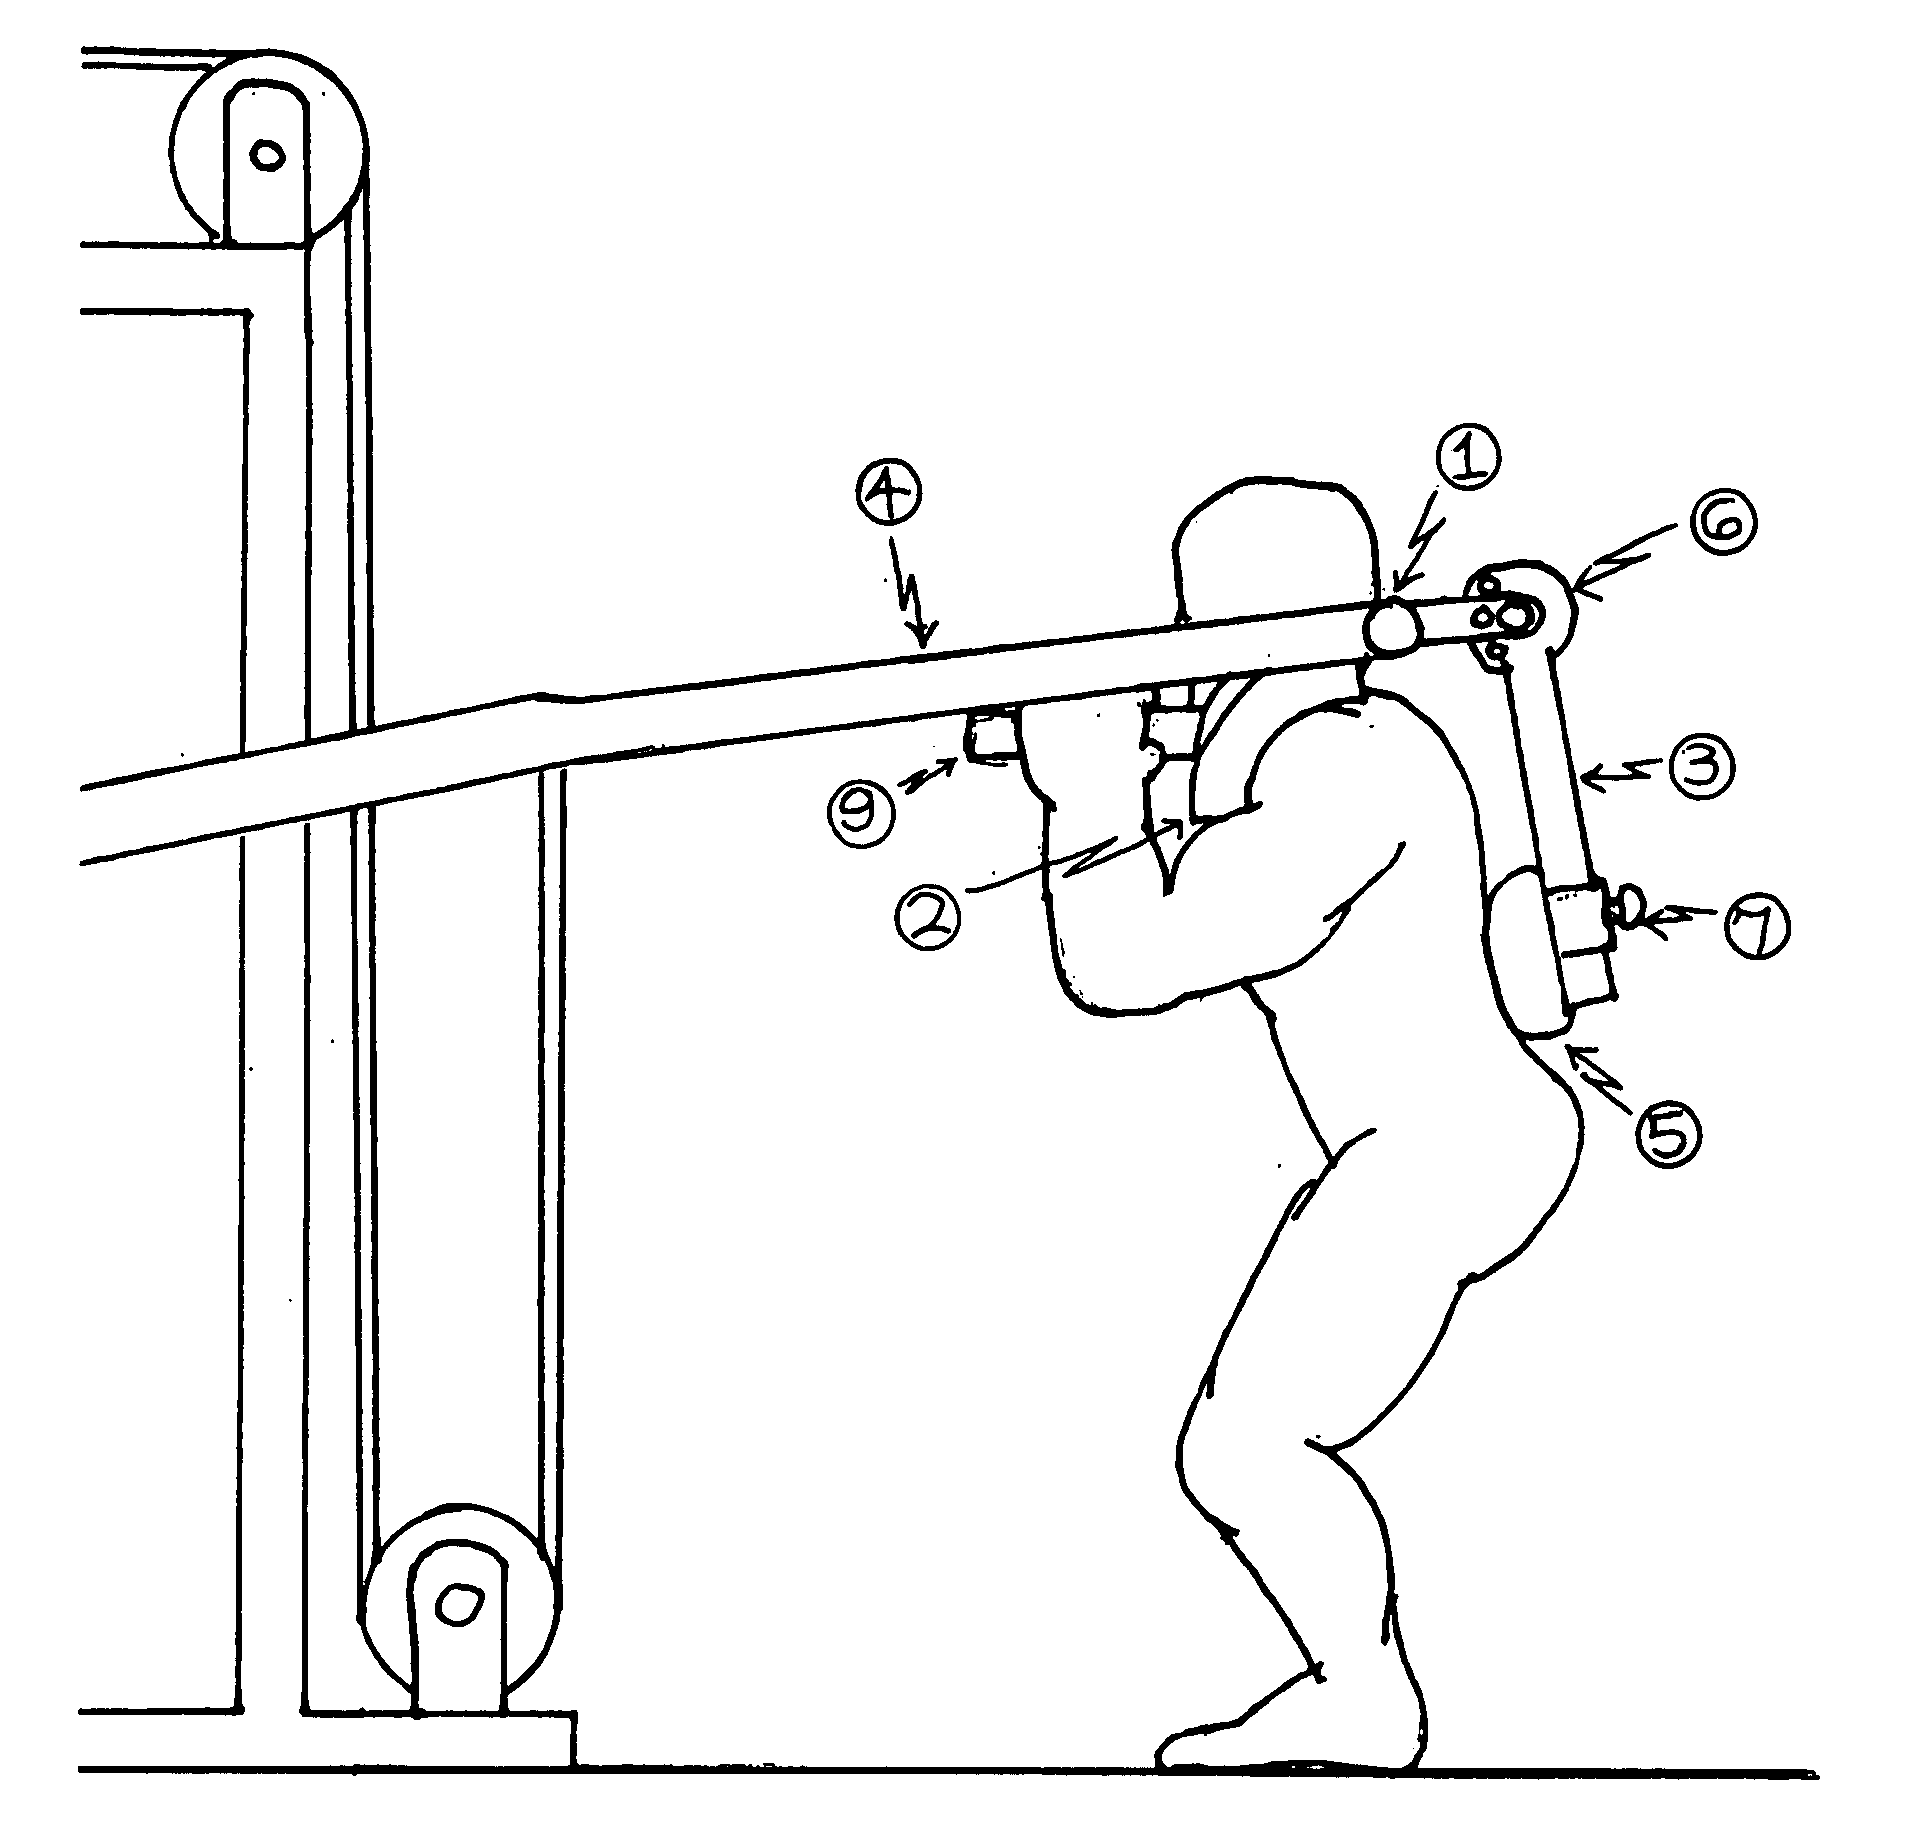 Apparatus to maintain spinal alignment during the squat exercise